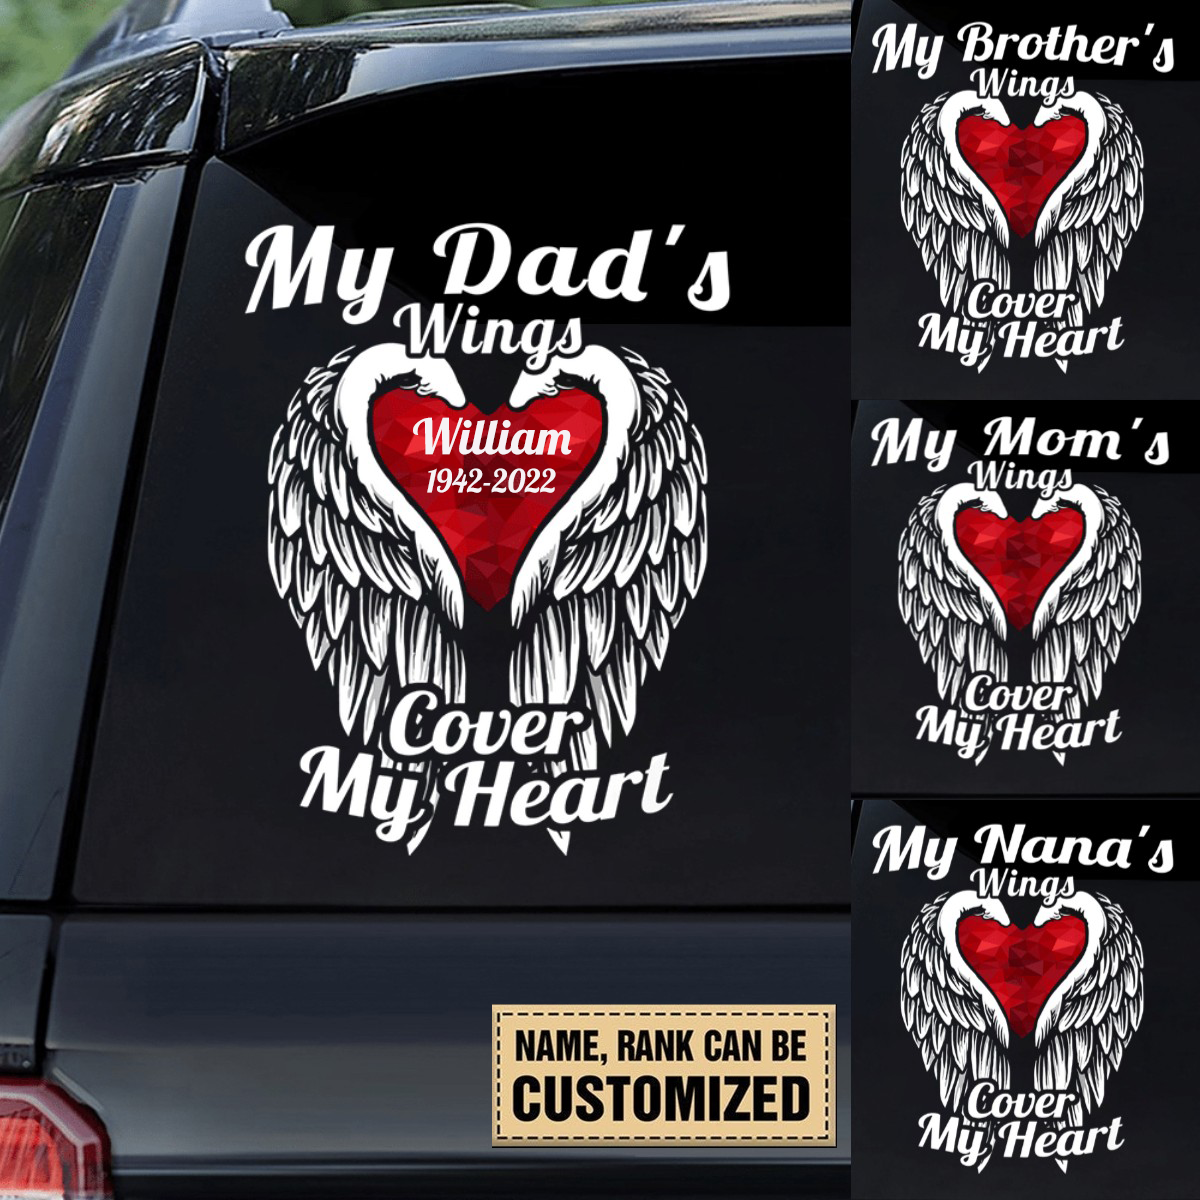 Personalized My Angel's Wings Cover My Heart Decal